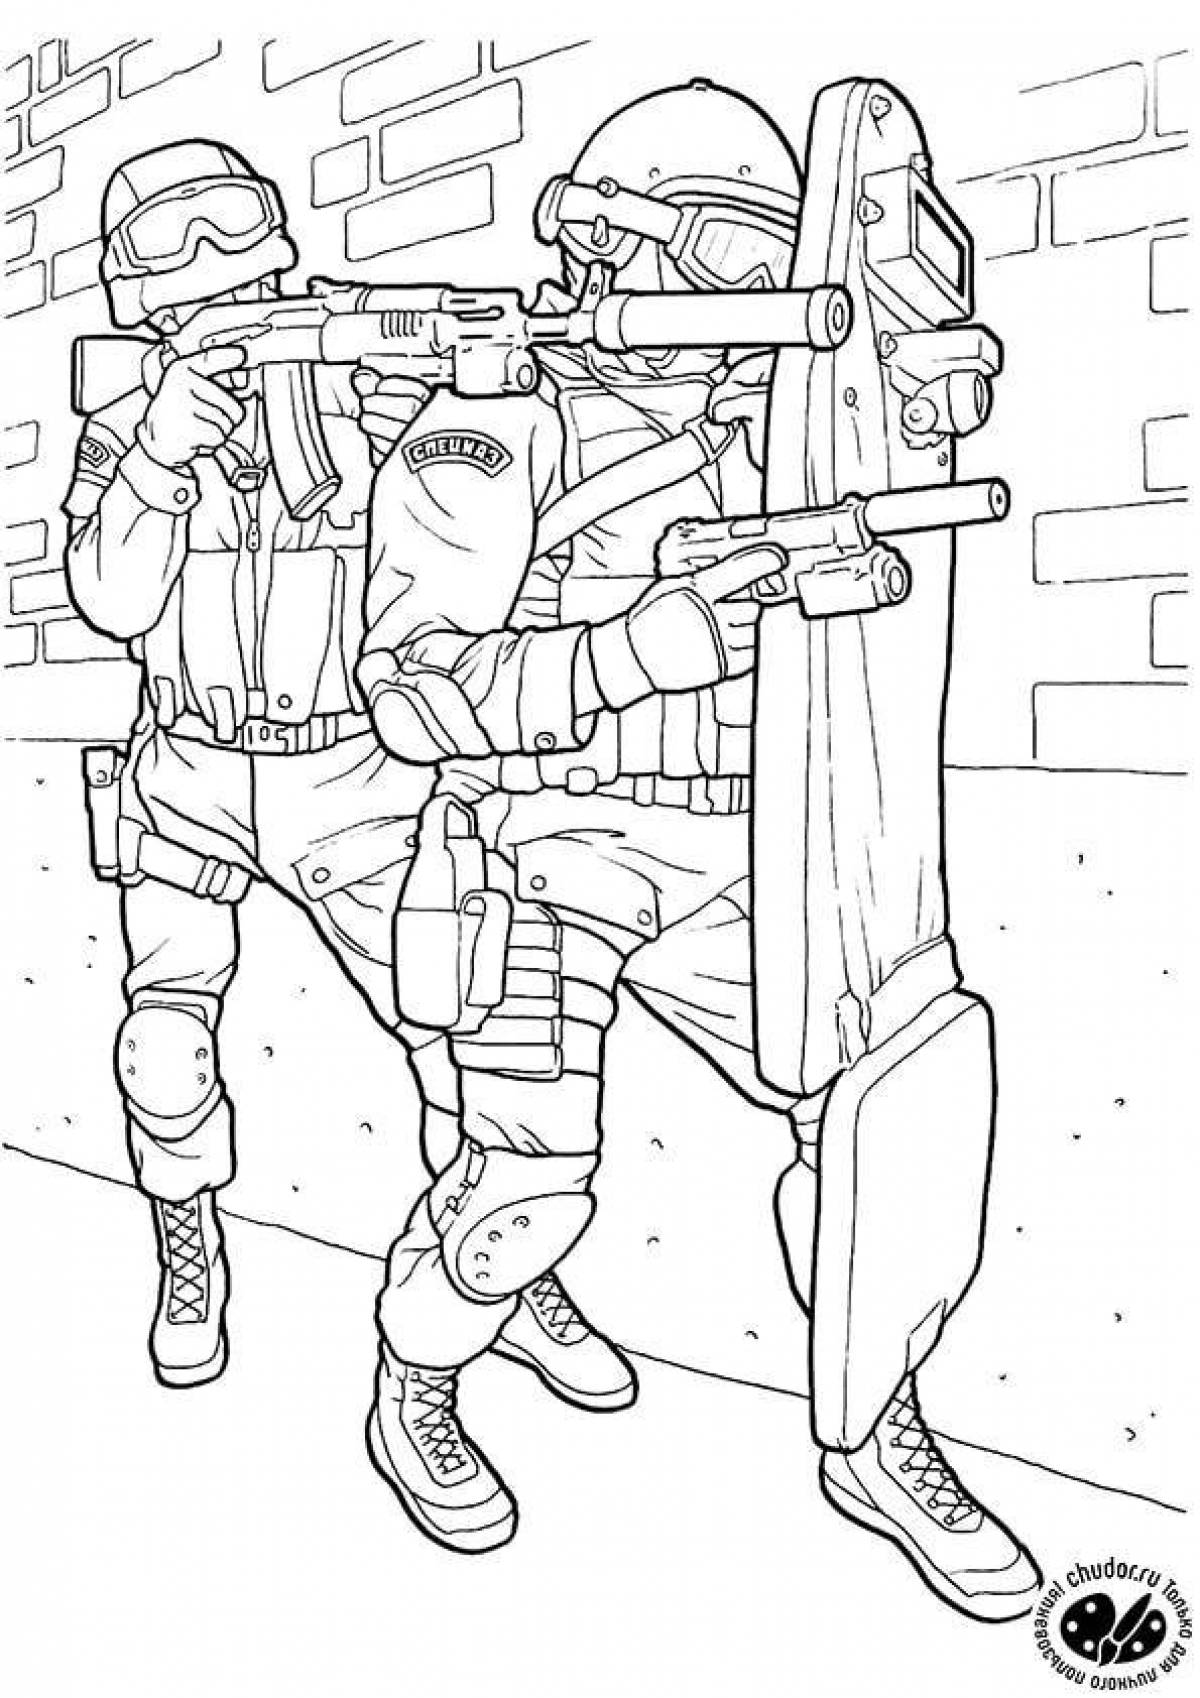 Vibrant special forces coloring page for kids